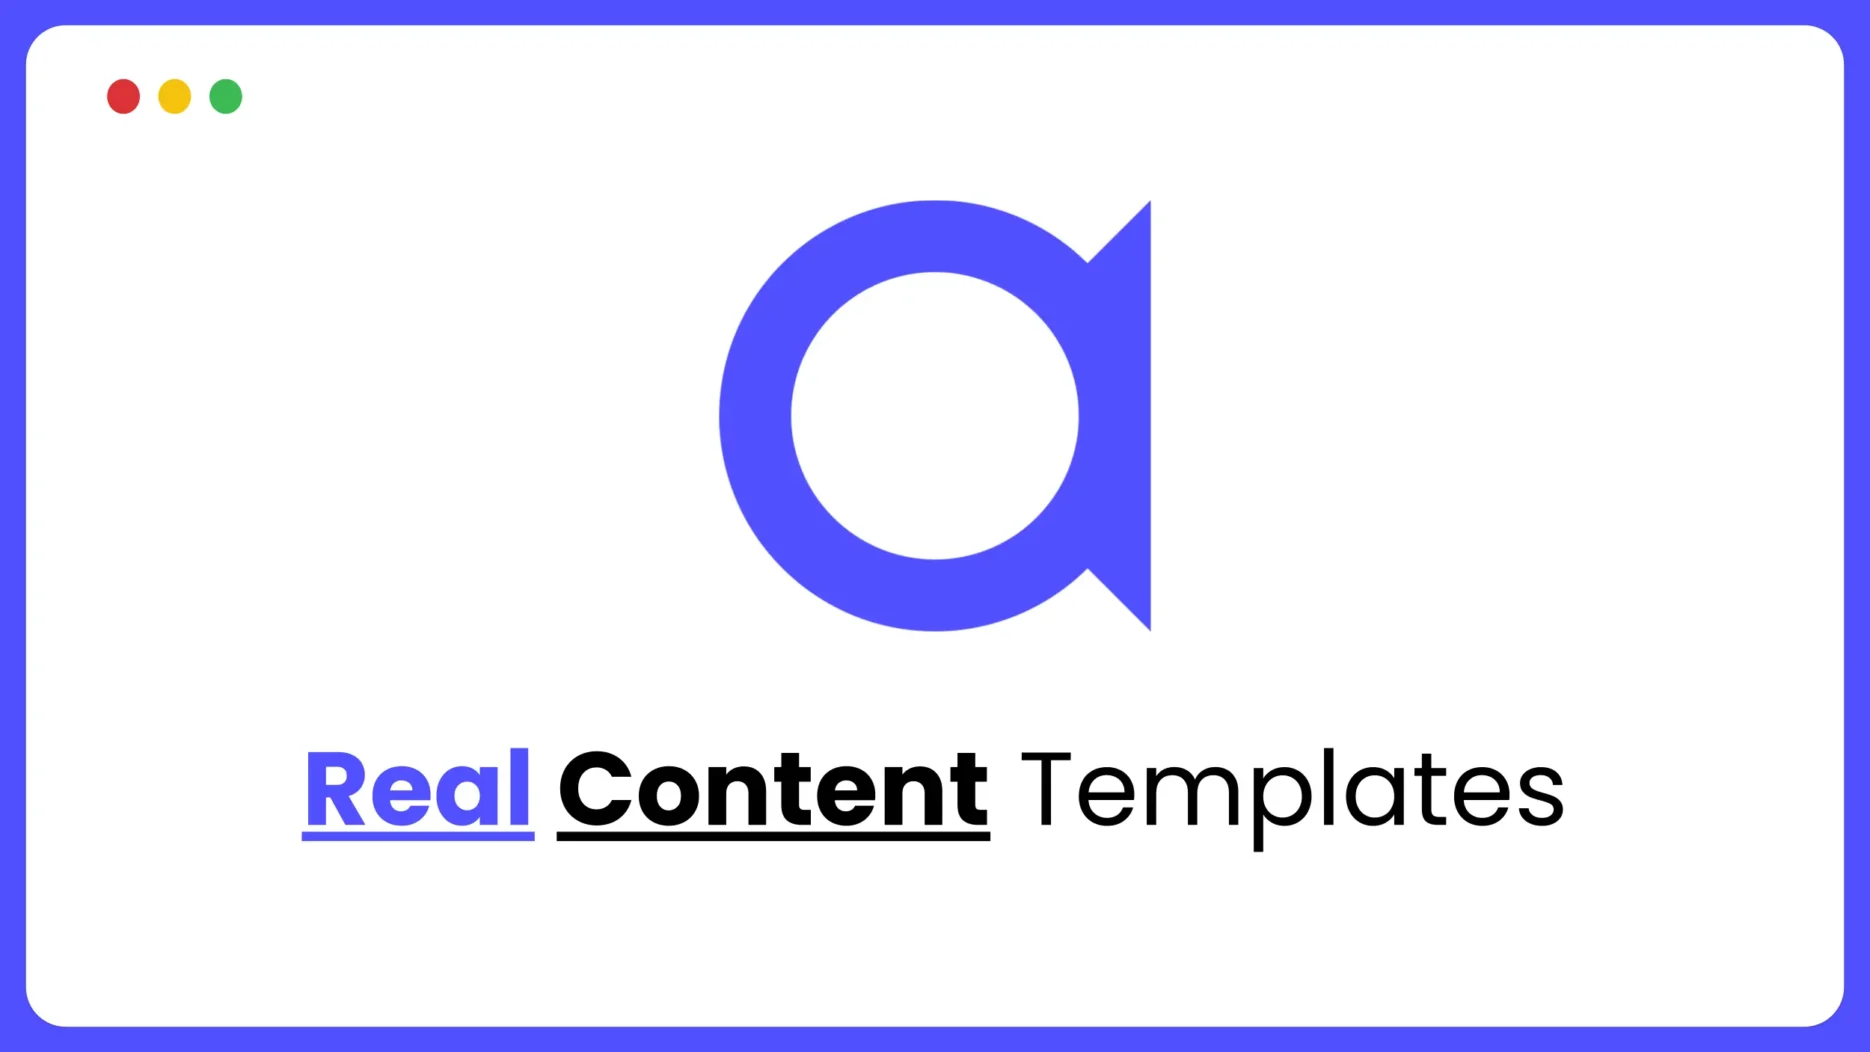 Real Content Templates